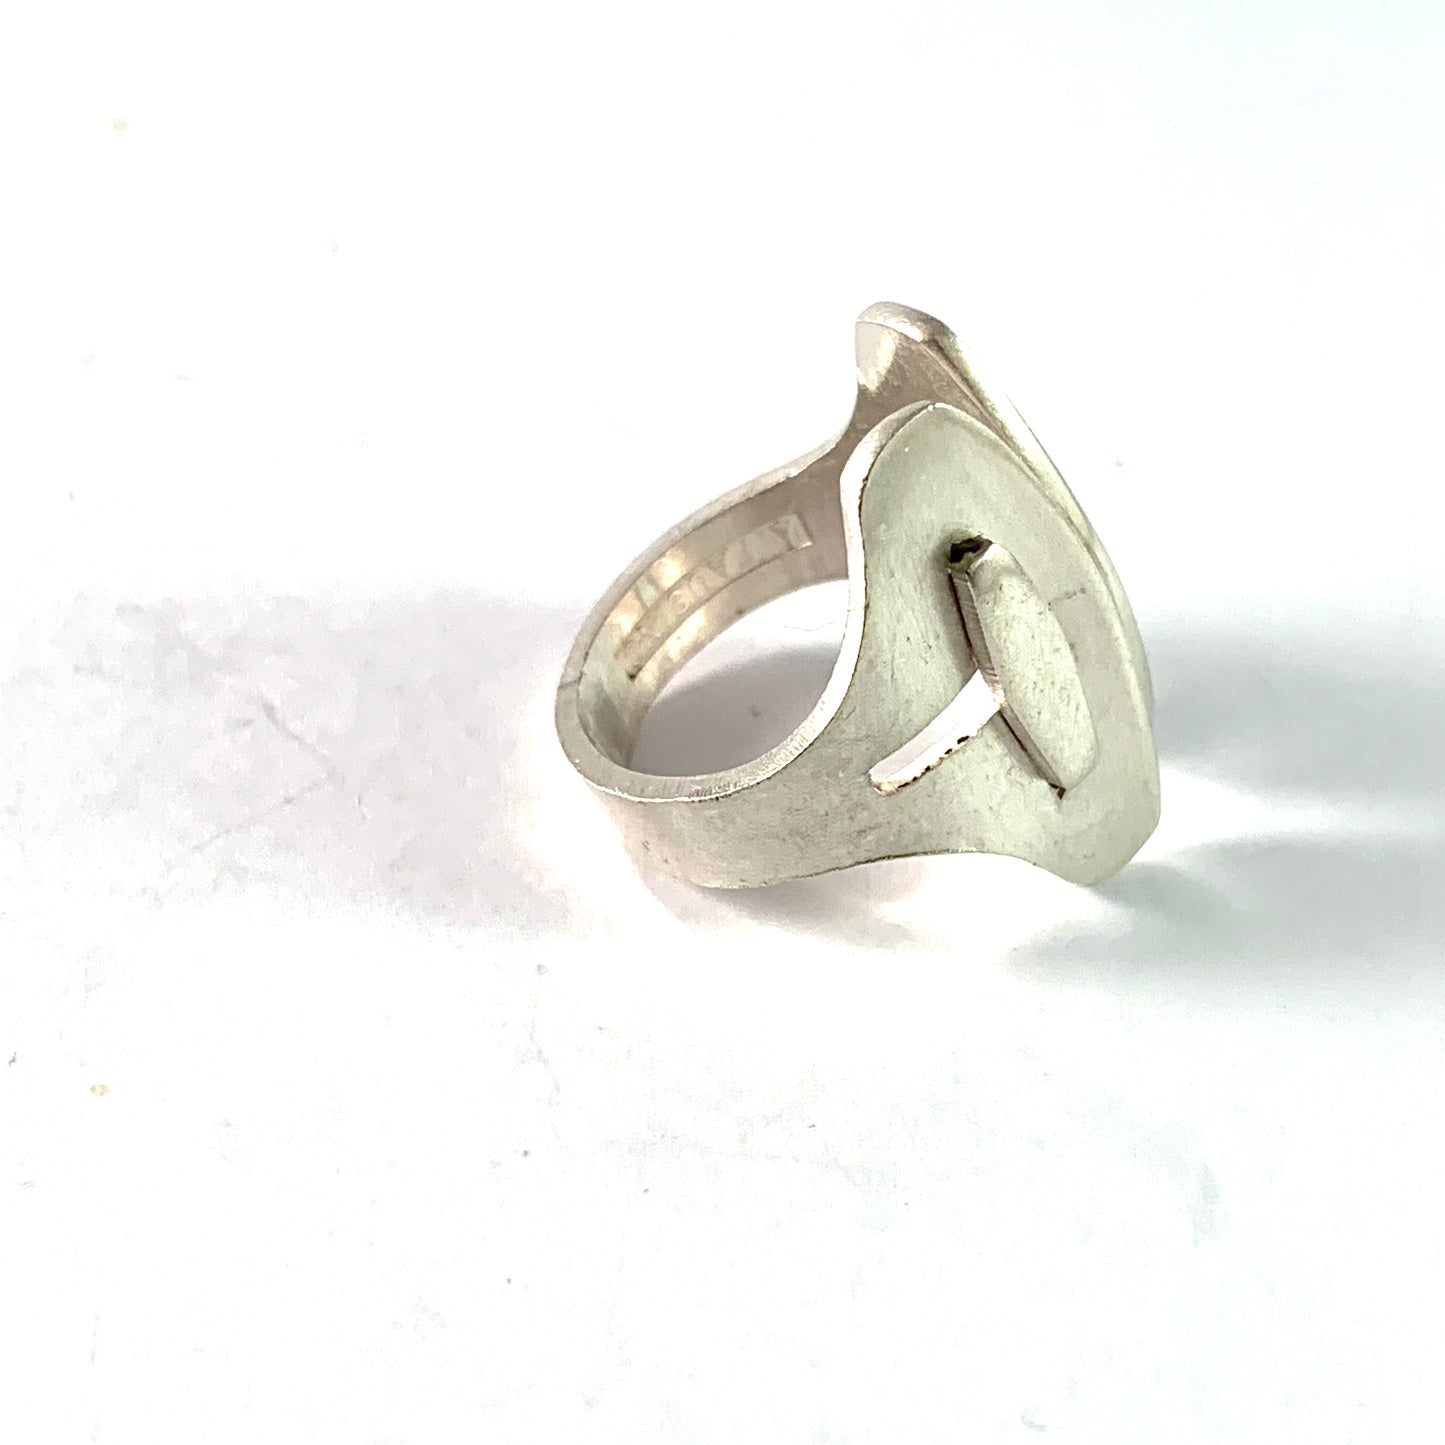 Age Fausing, Denmark 1960s. Vintage Modernist Sterling Silver Ring.